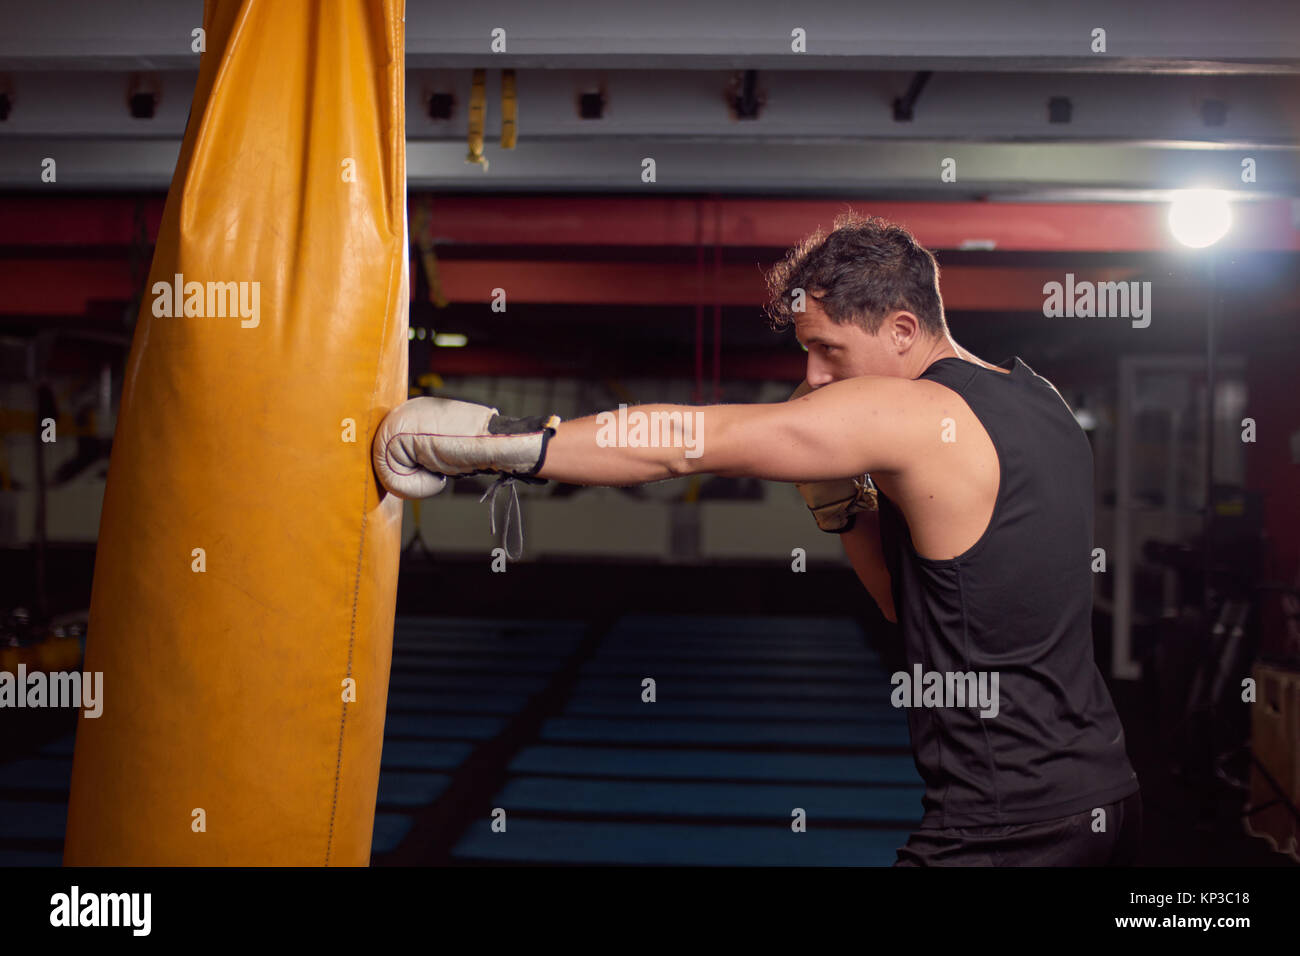 one young man, boxer hand hitting punching bag, practicing indoors gym room, wearing boxing gloves, upper body shot. Stock Photo